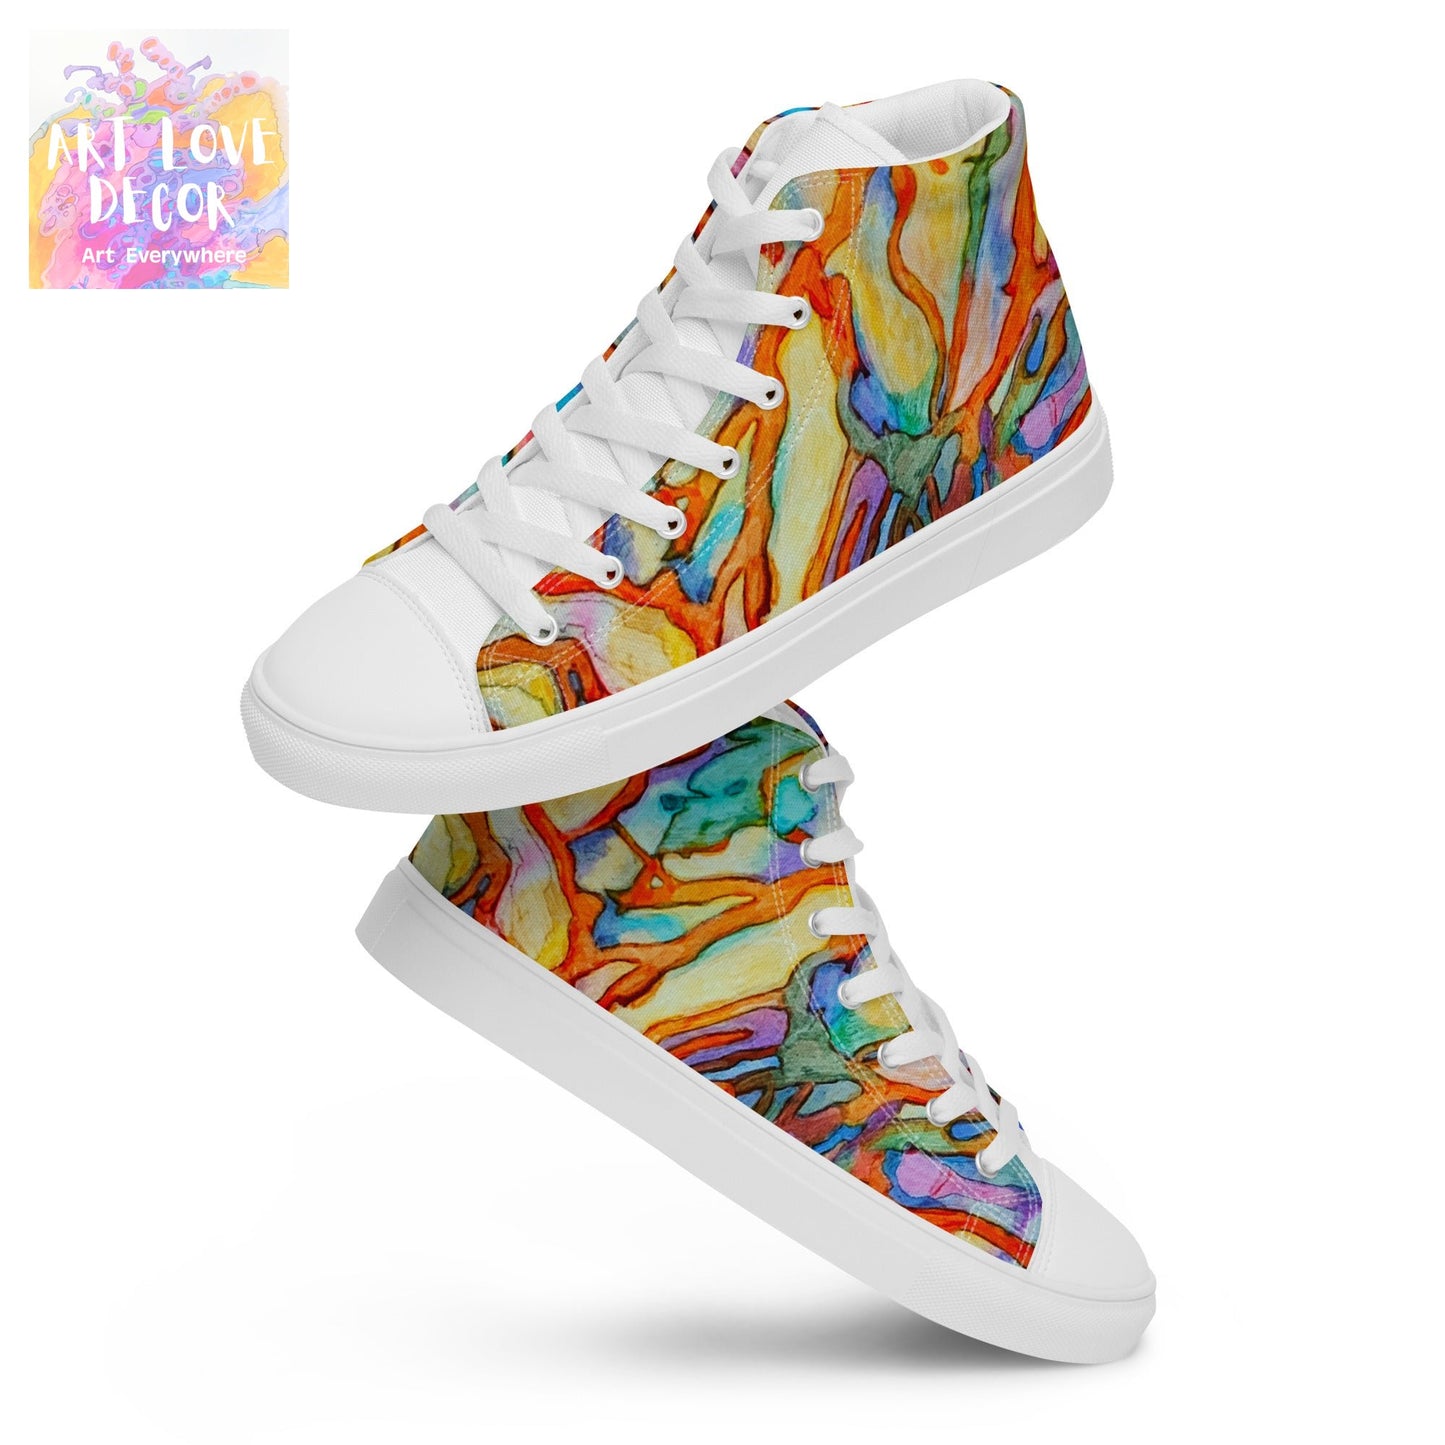 Coral Reef Women’s high top shoes - Art Love Decor